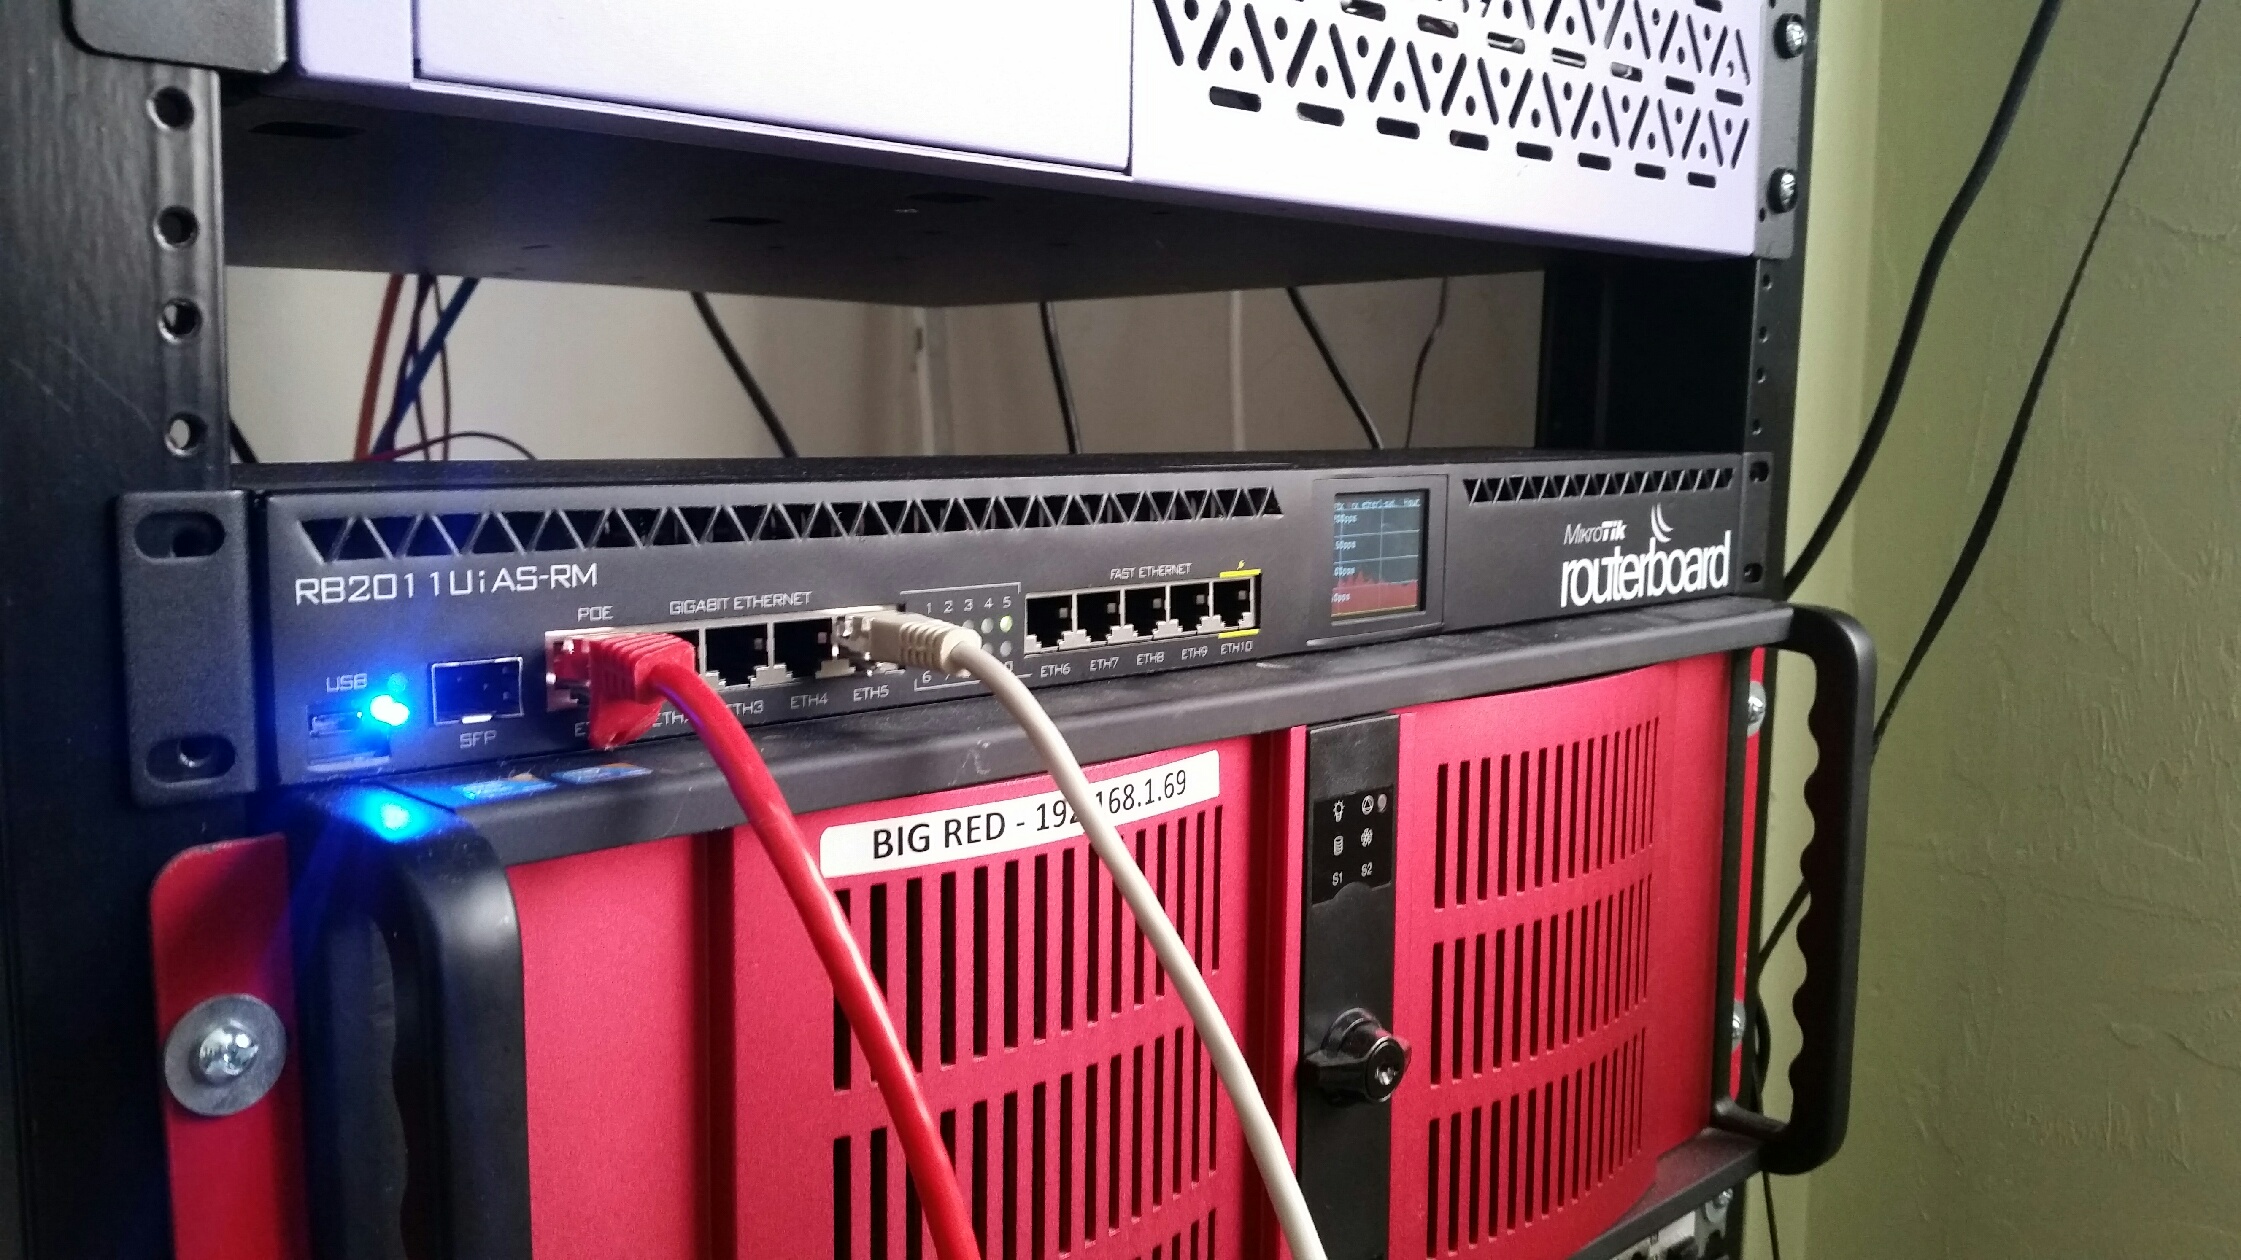 RouterBOARD router in the Gainesville rack